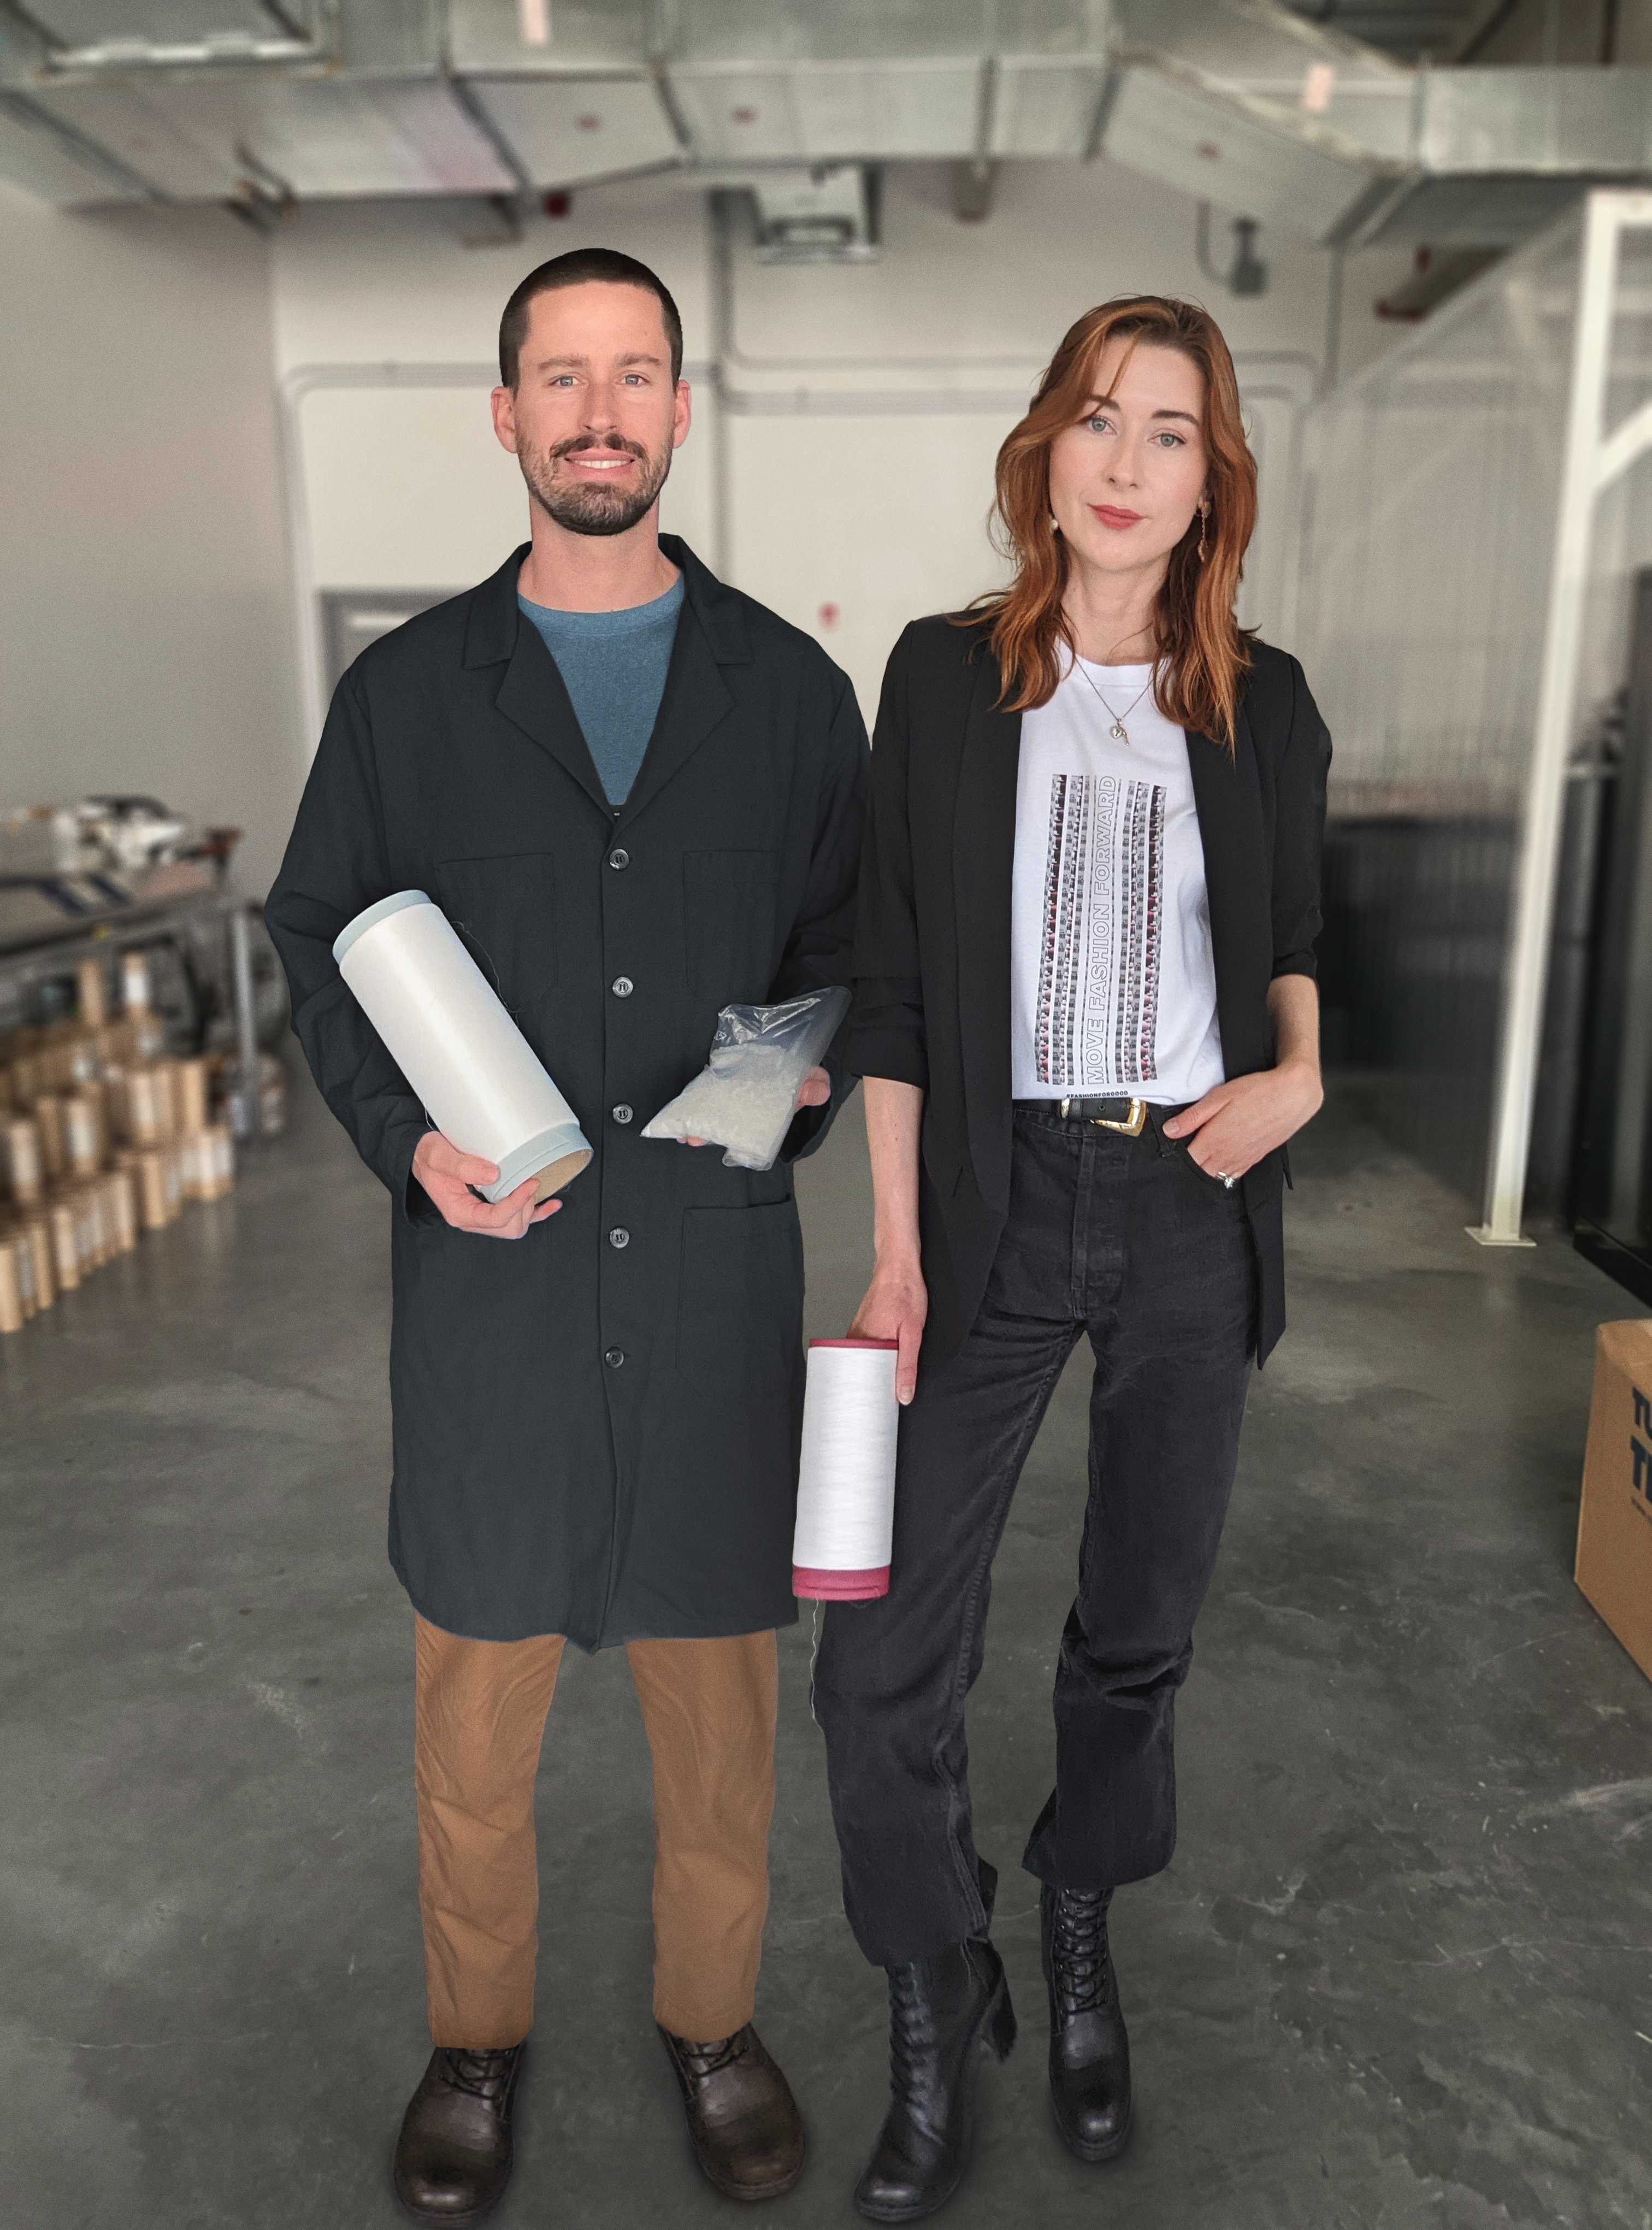 Kintra Fibers co-founders Billy McCall and Alissa Baier-Lentz at their Brooklyn, NY lab